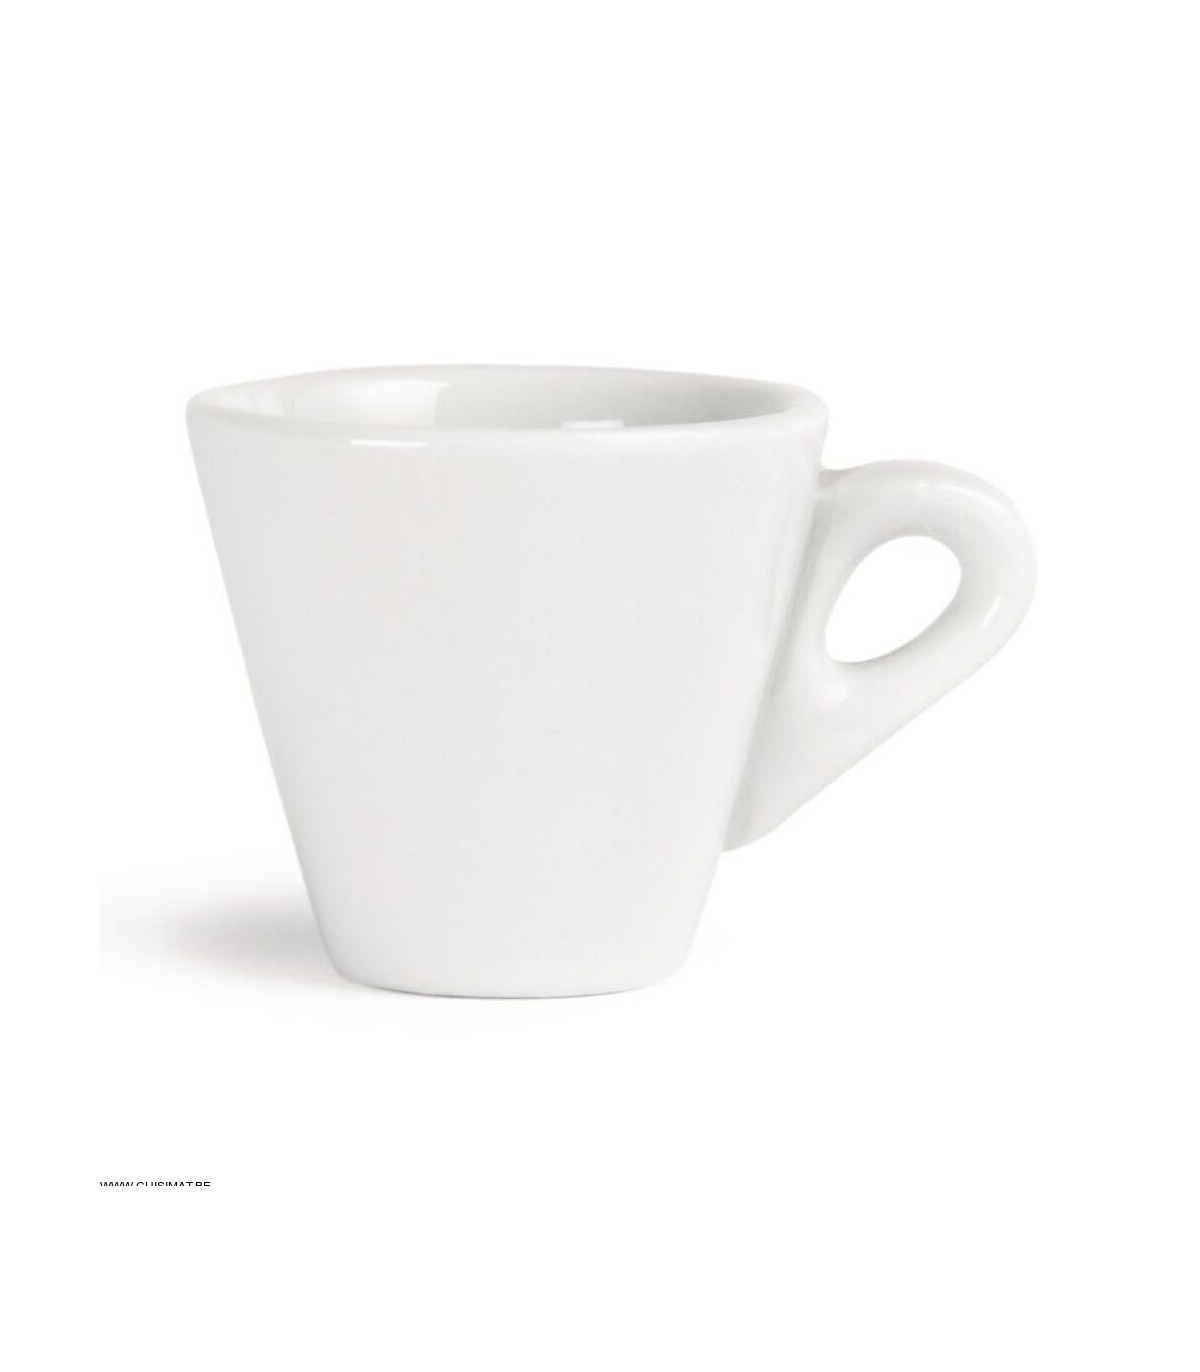 TASSE A CAFE EXPRESSO INCLINEE OLYMPIA BLANC 9 CL  OLYMPIA PORCELAINE dans OLYMPIA